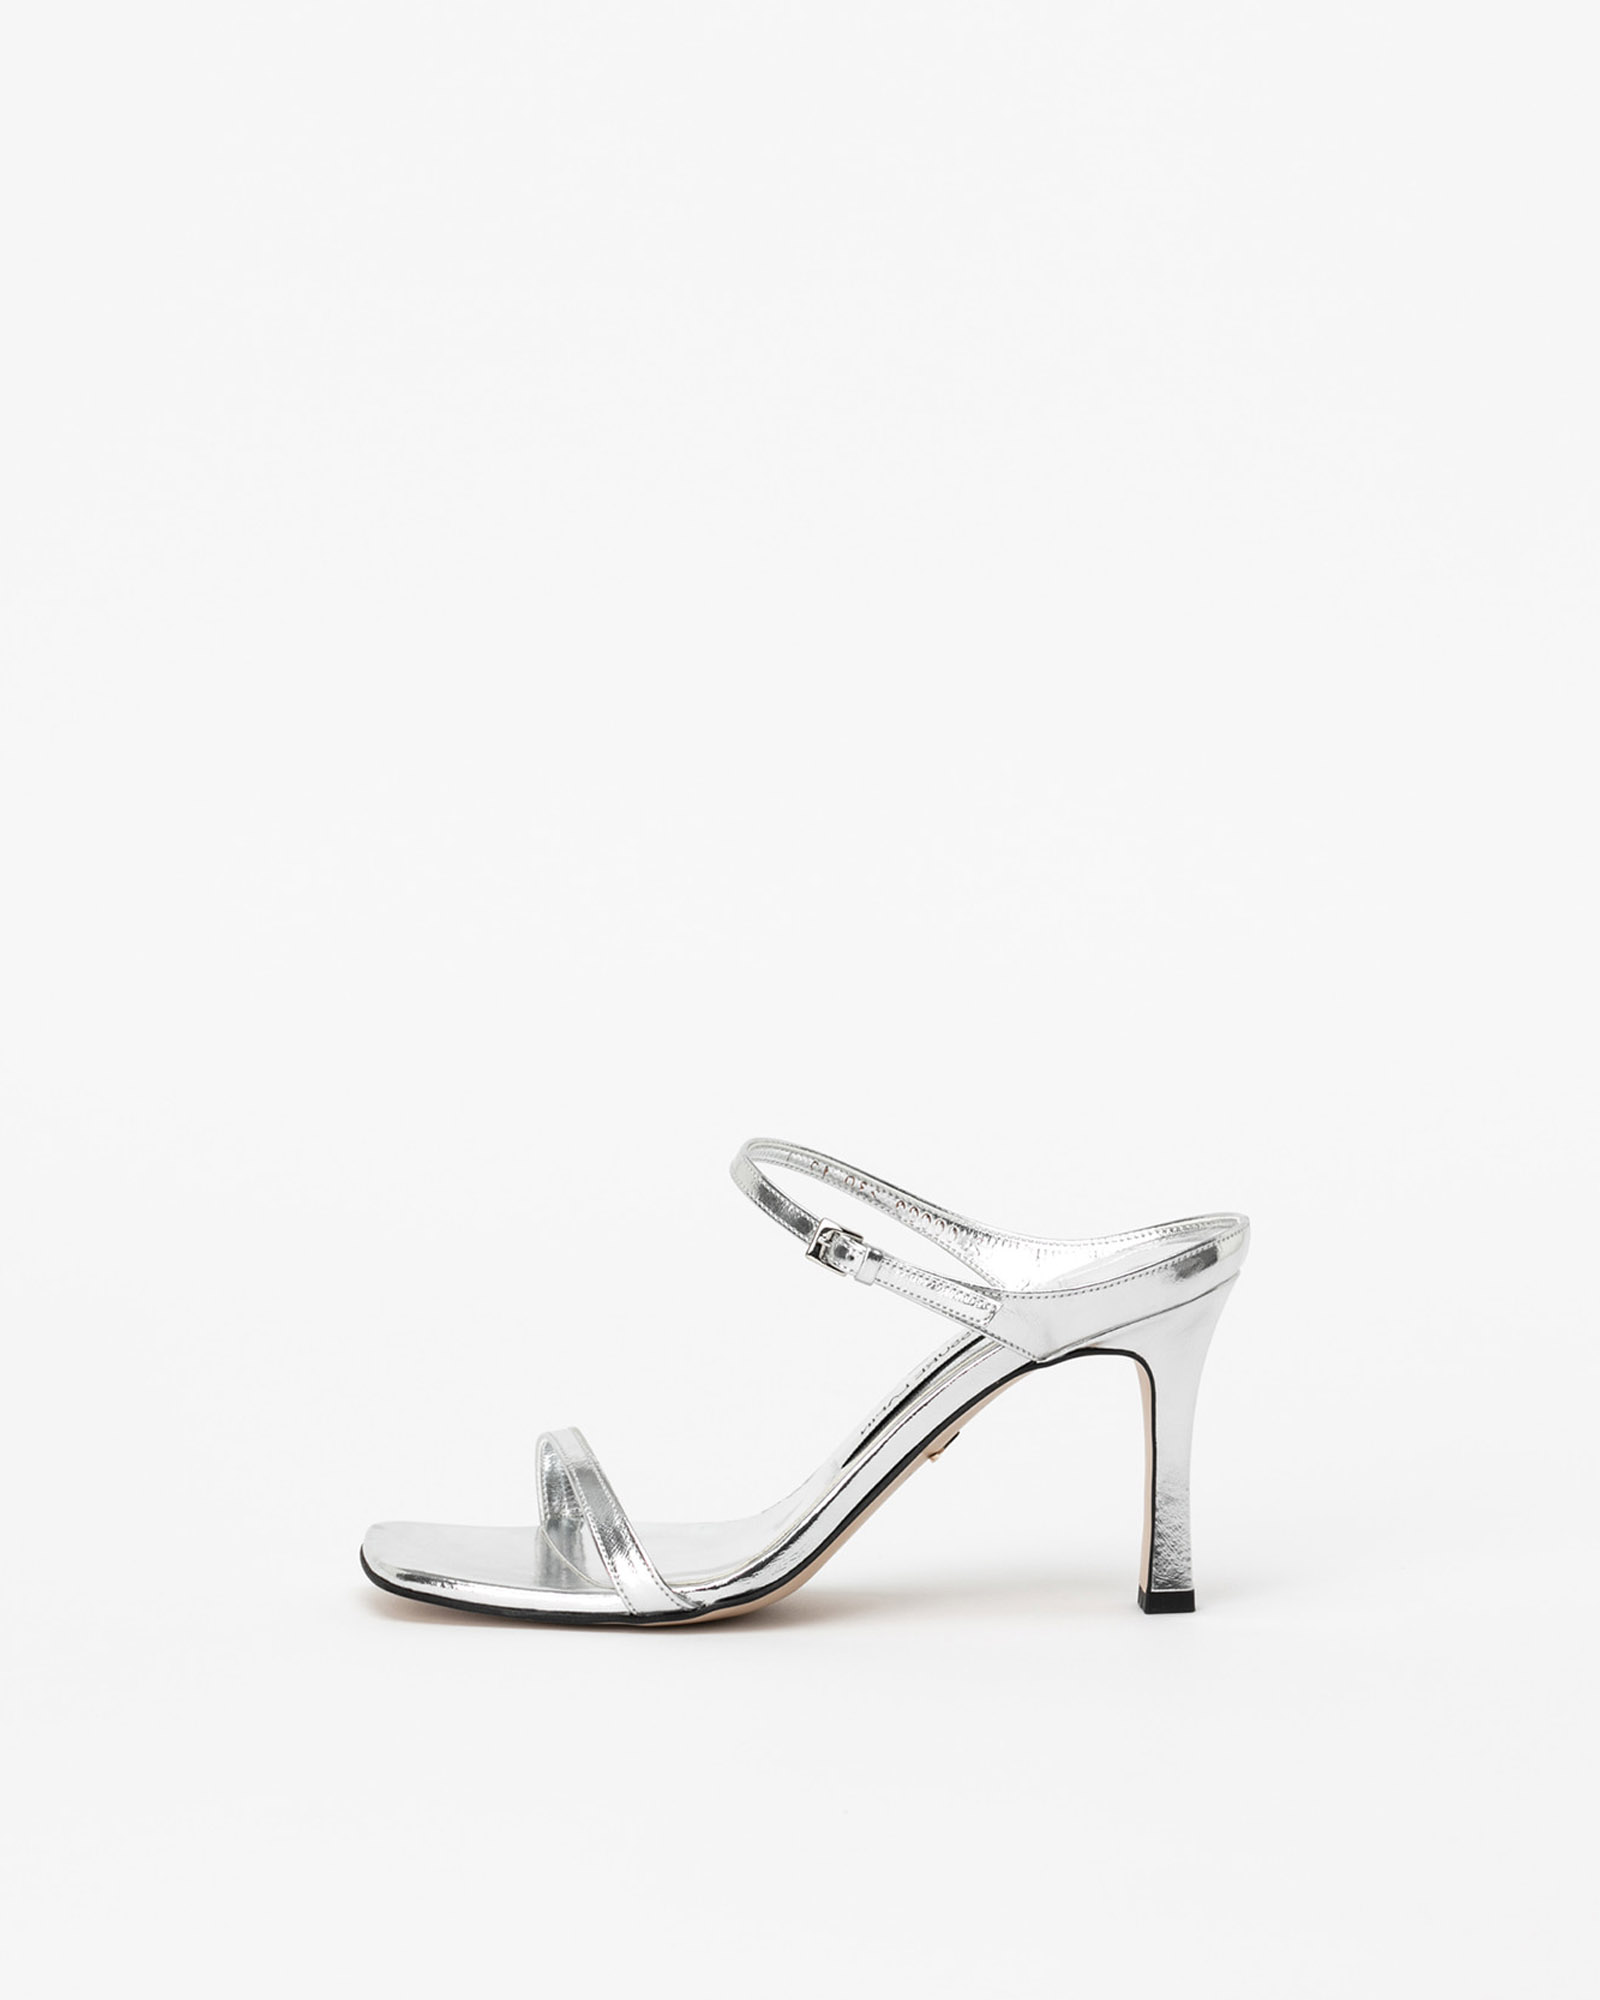 Sequire Buckled Strap Mule Sandals in Textured Silver